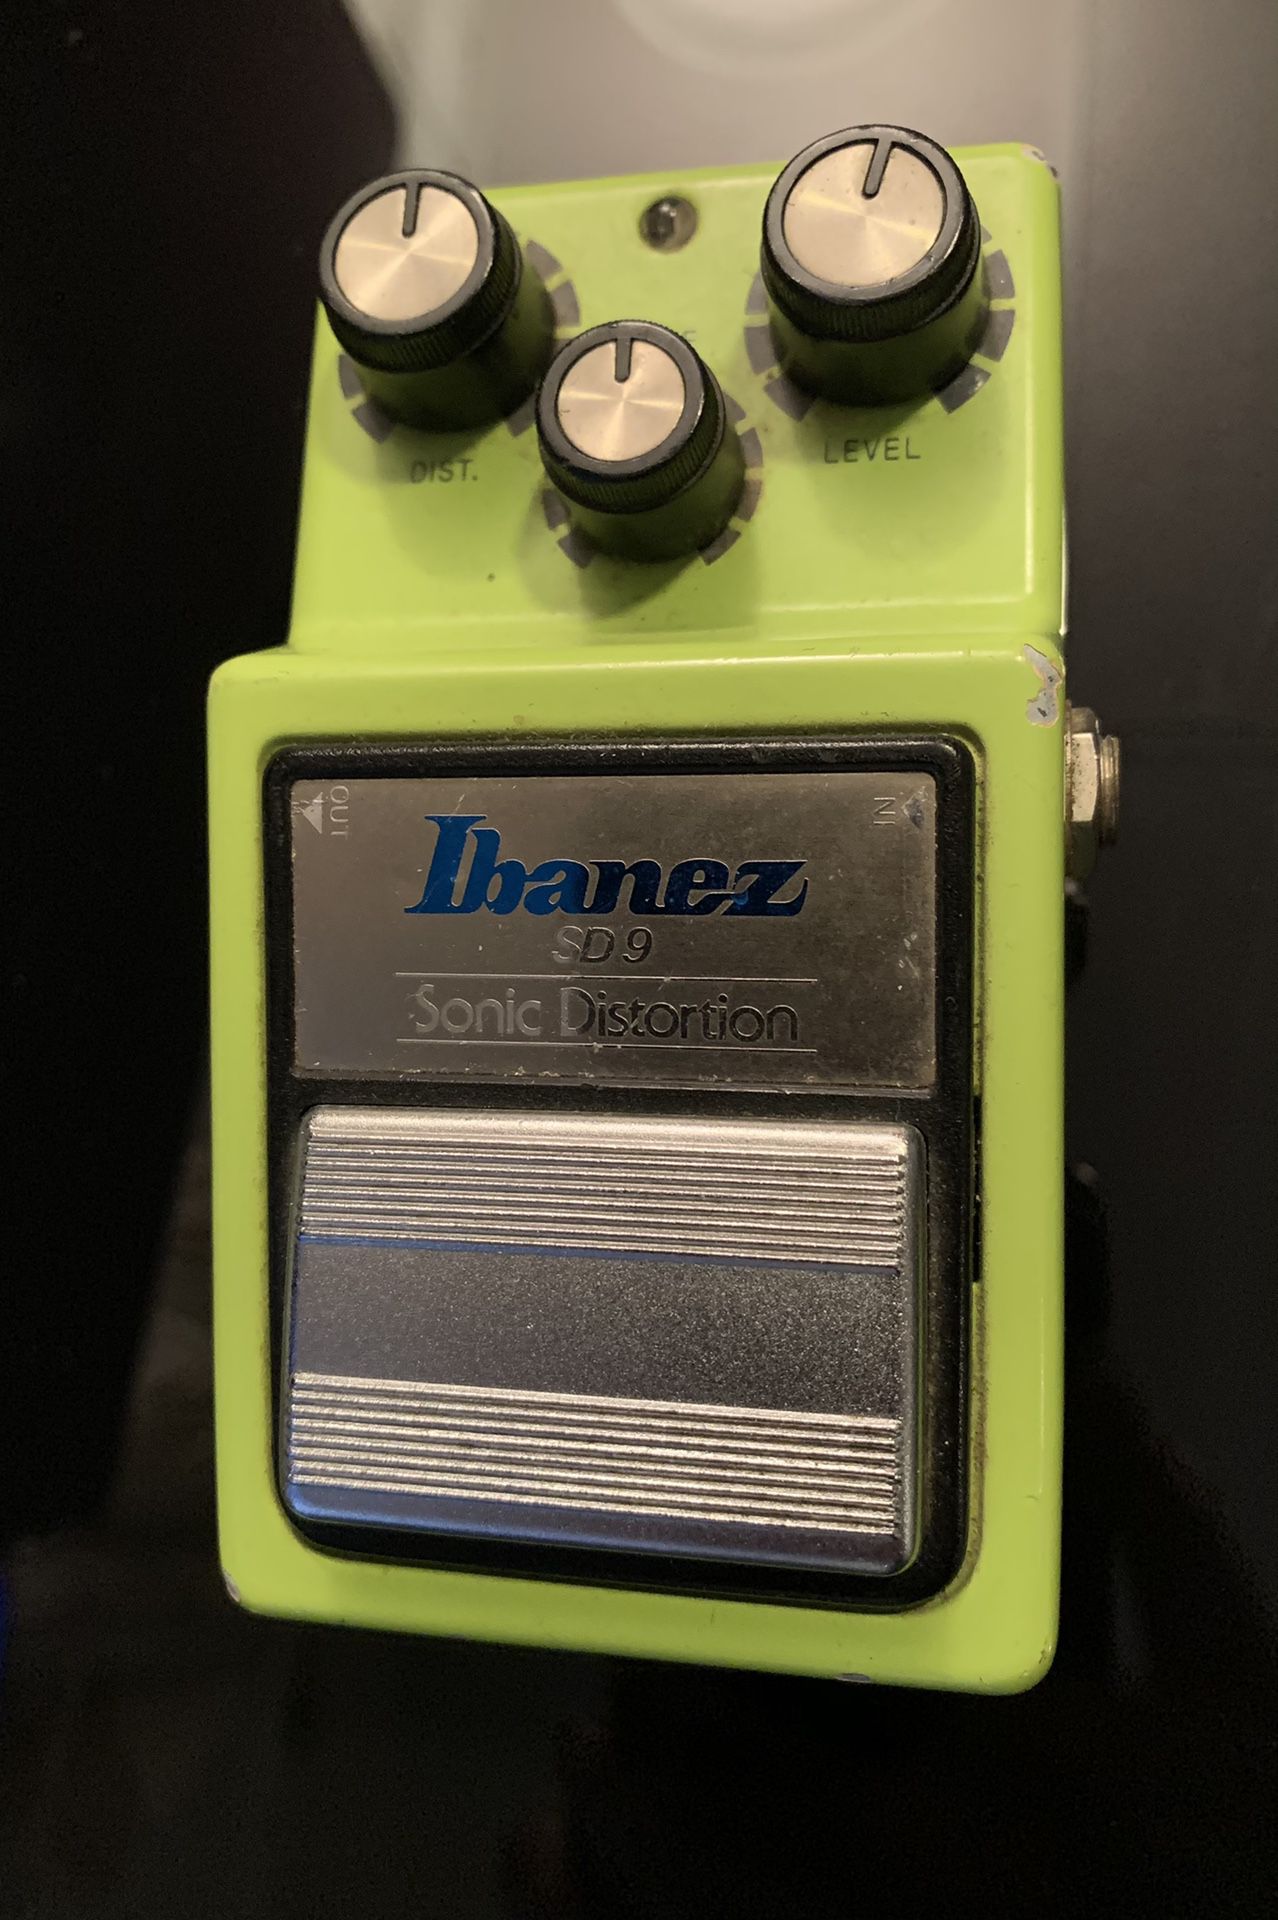 Ibanez SD9 Sonic Distortion Effects Pedal